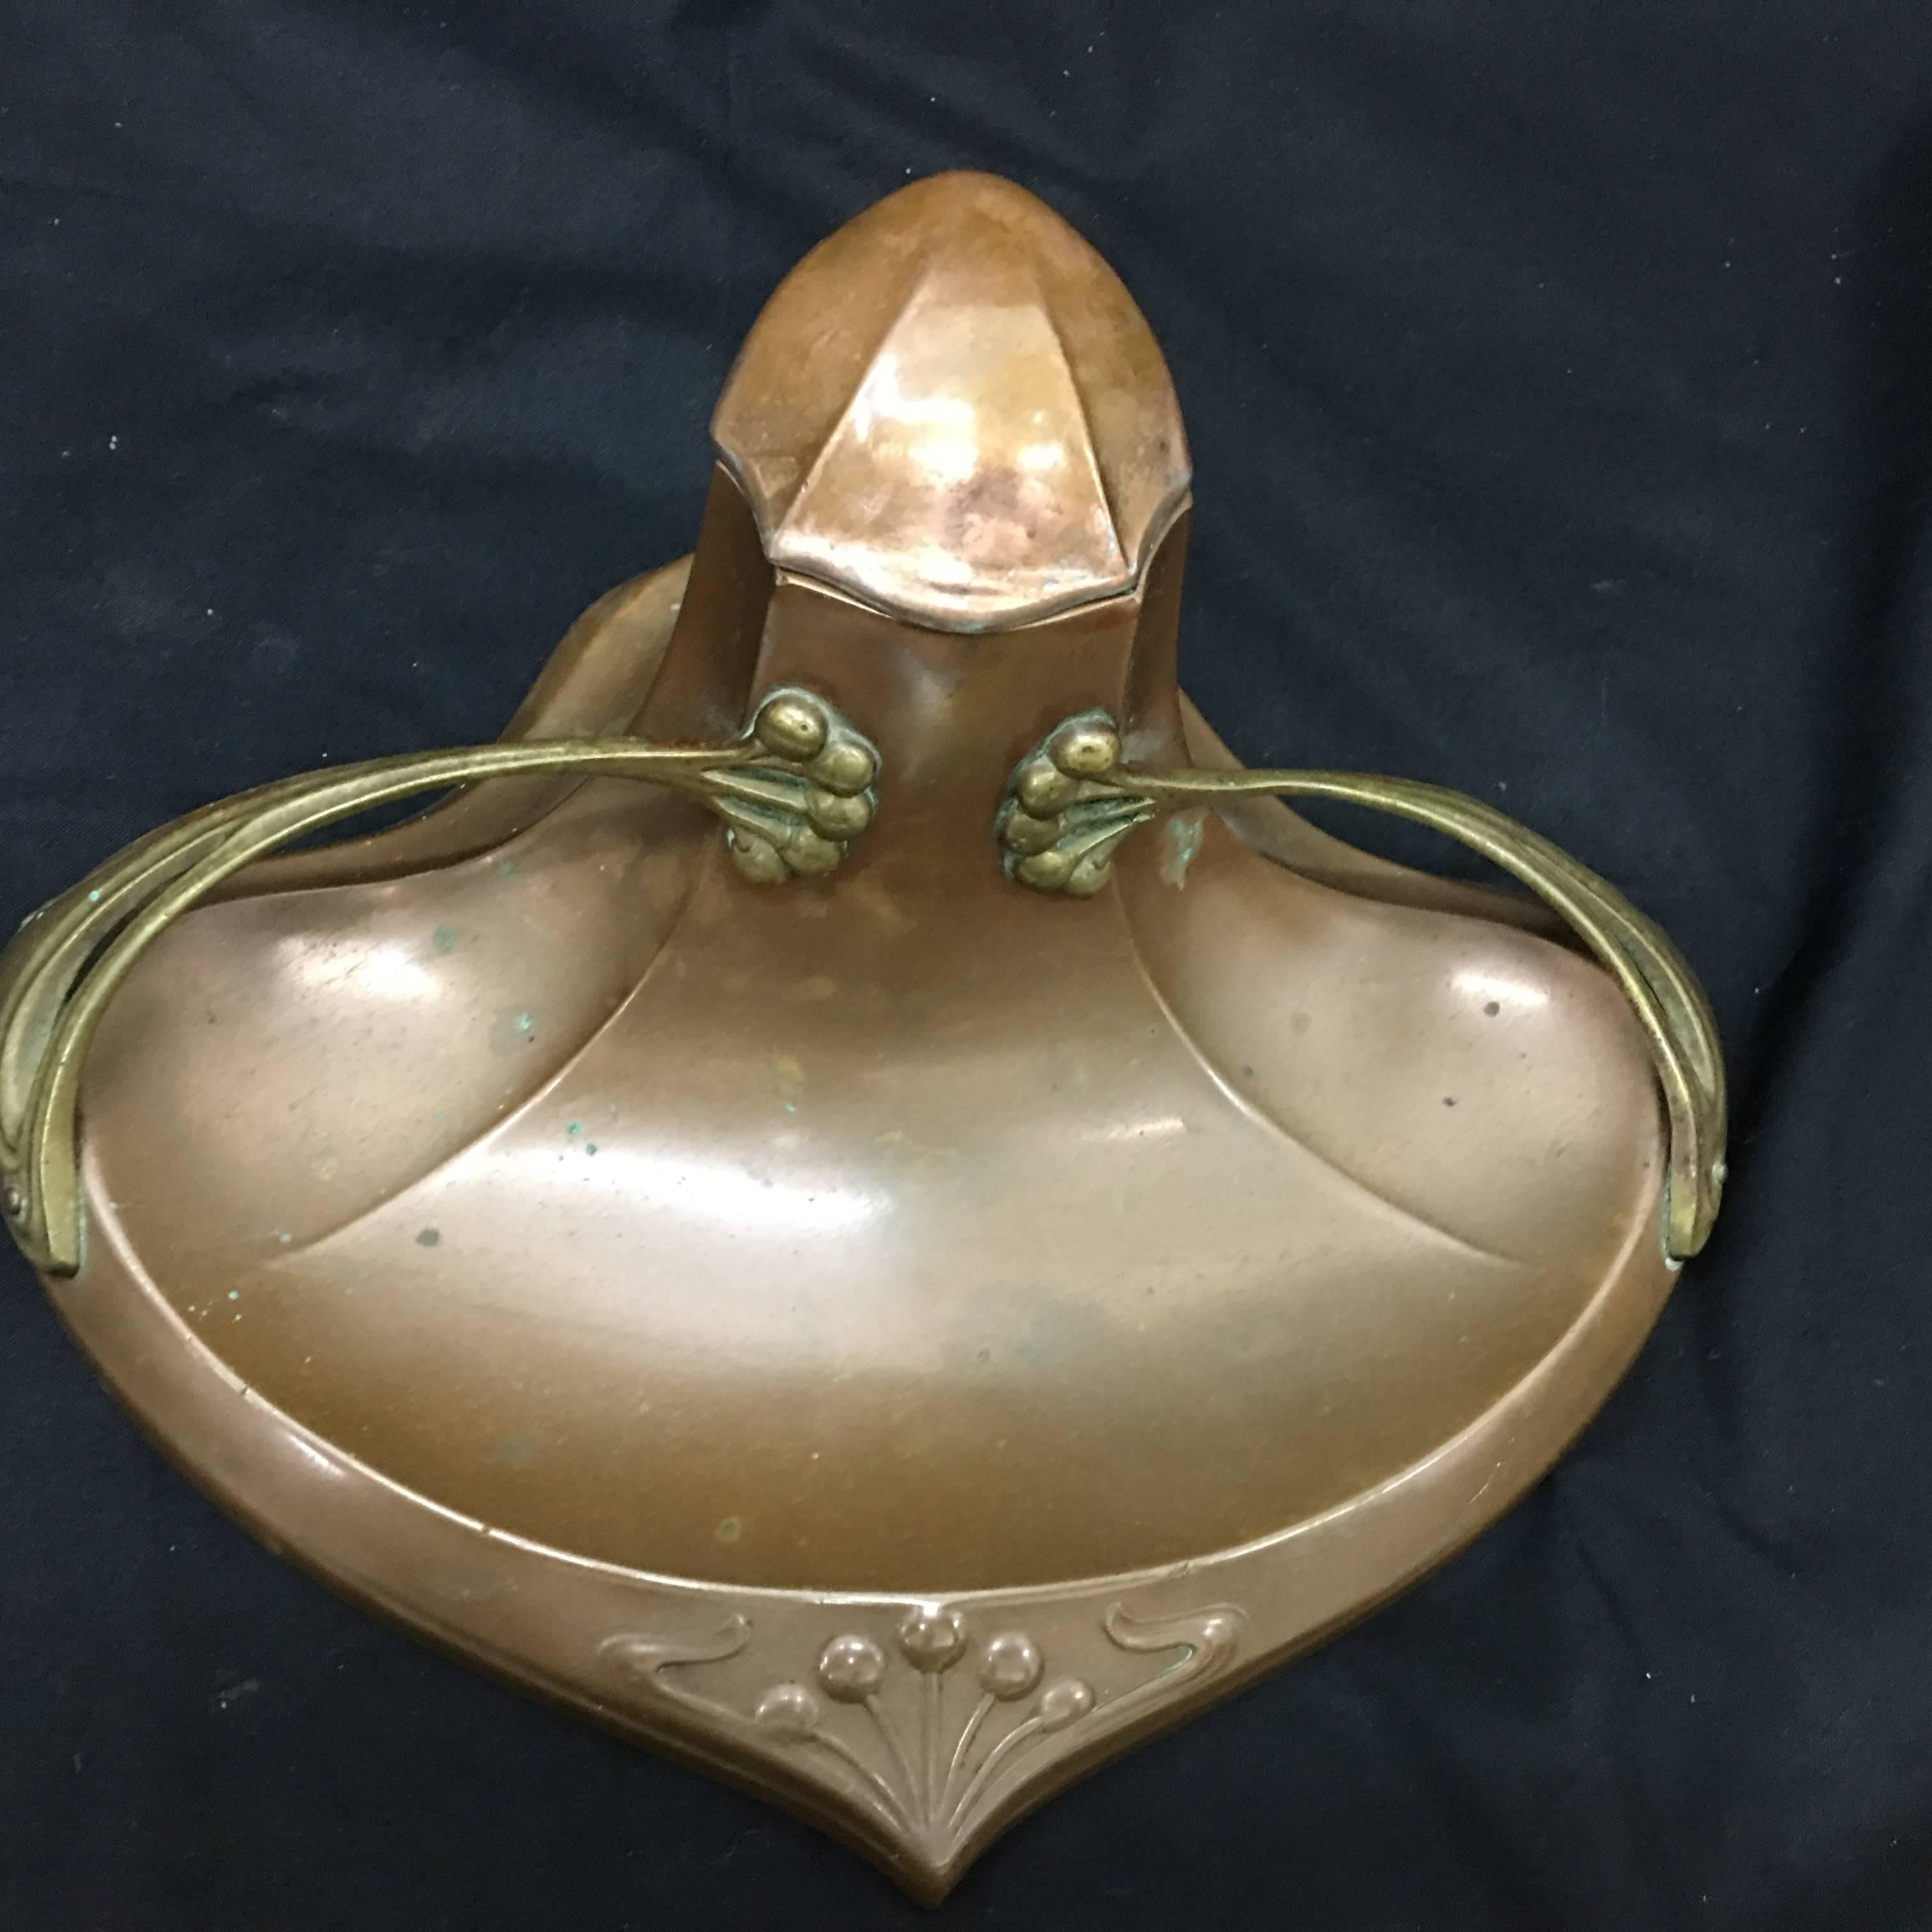 Very stylish inkwell made in Germany, 1900 circa, it's in copper and brass.